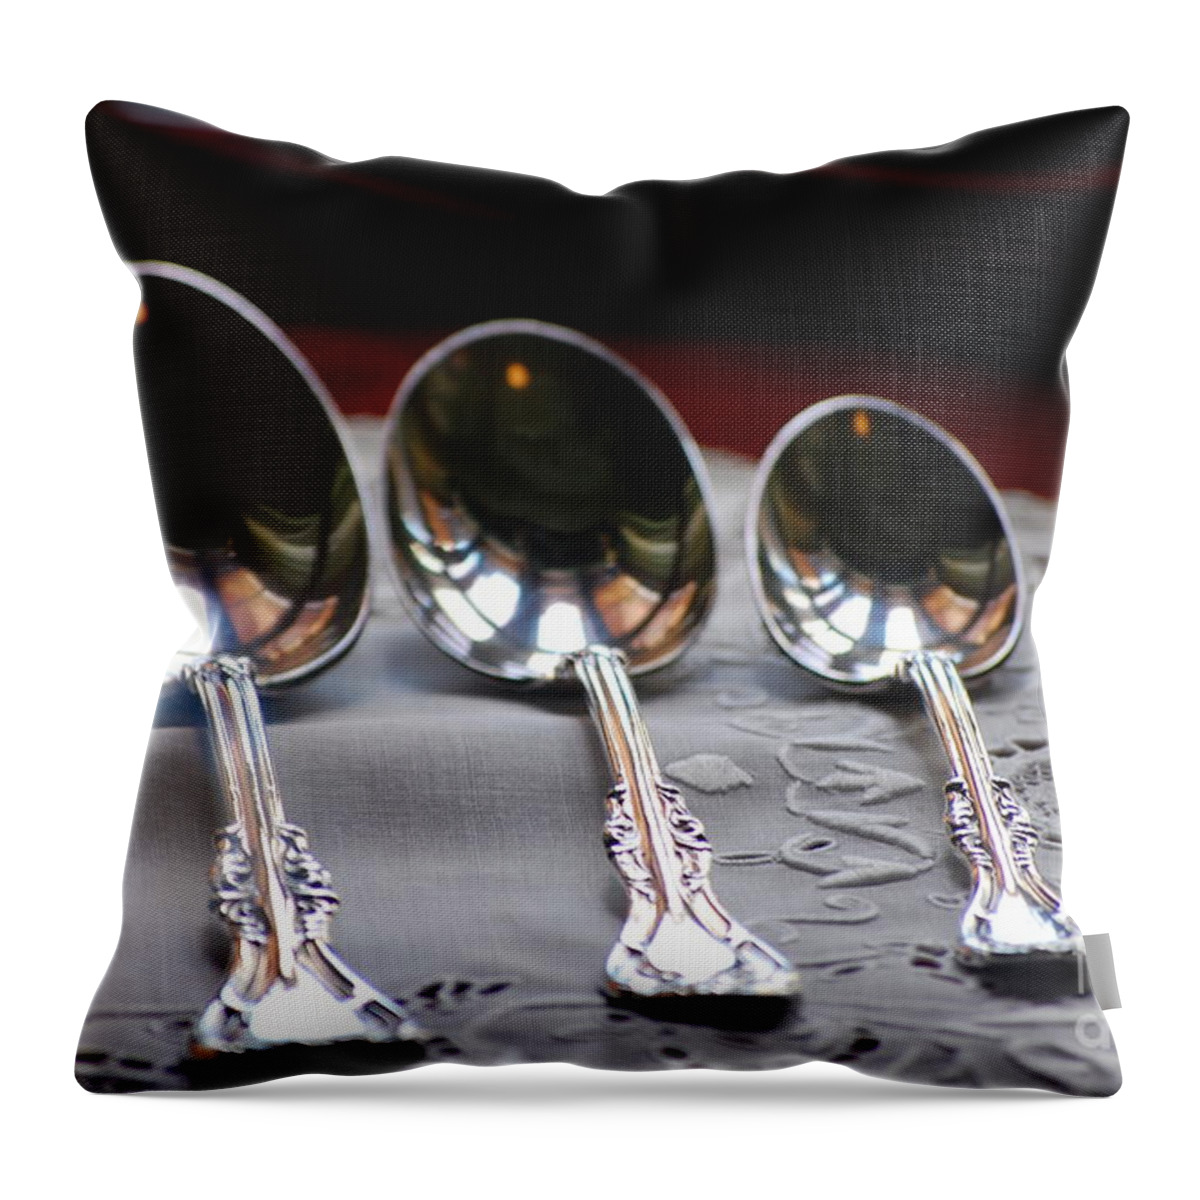 Spoons Throw Pillow featuring the photograph Four Spoons and a Fork by Robert Meanor